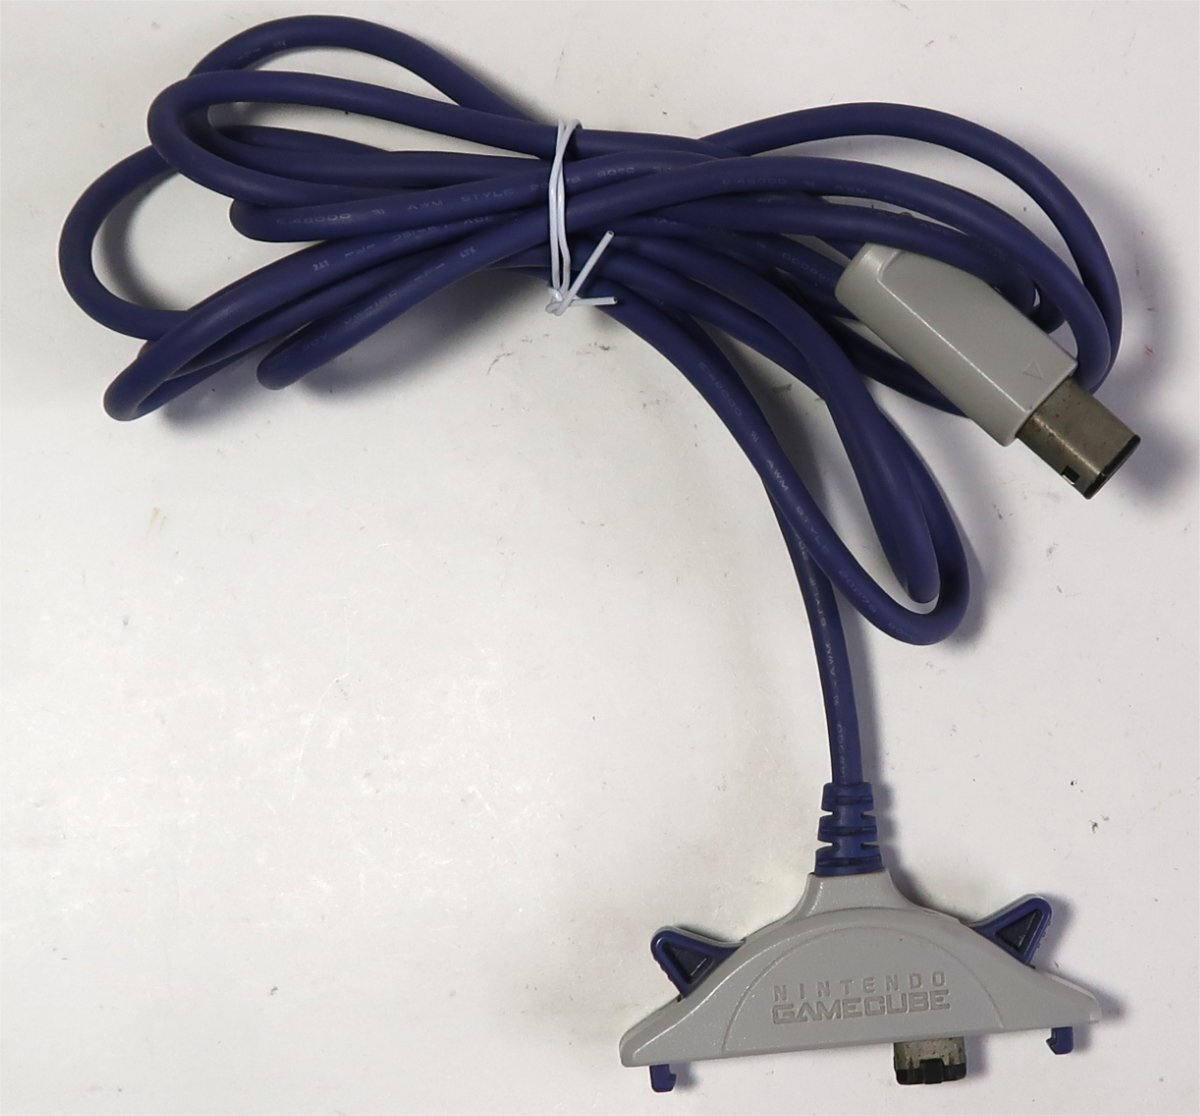  Game Cube for GBA cable, used 